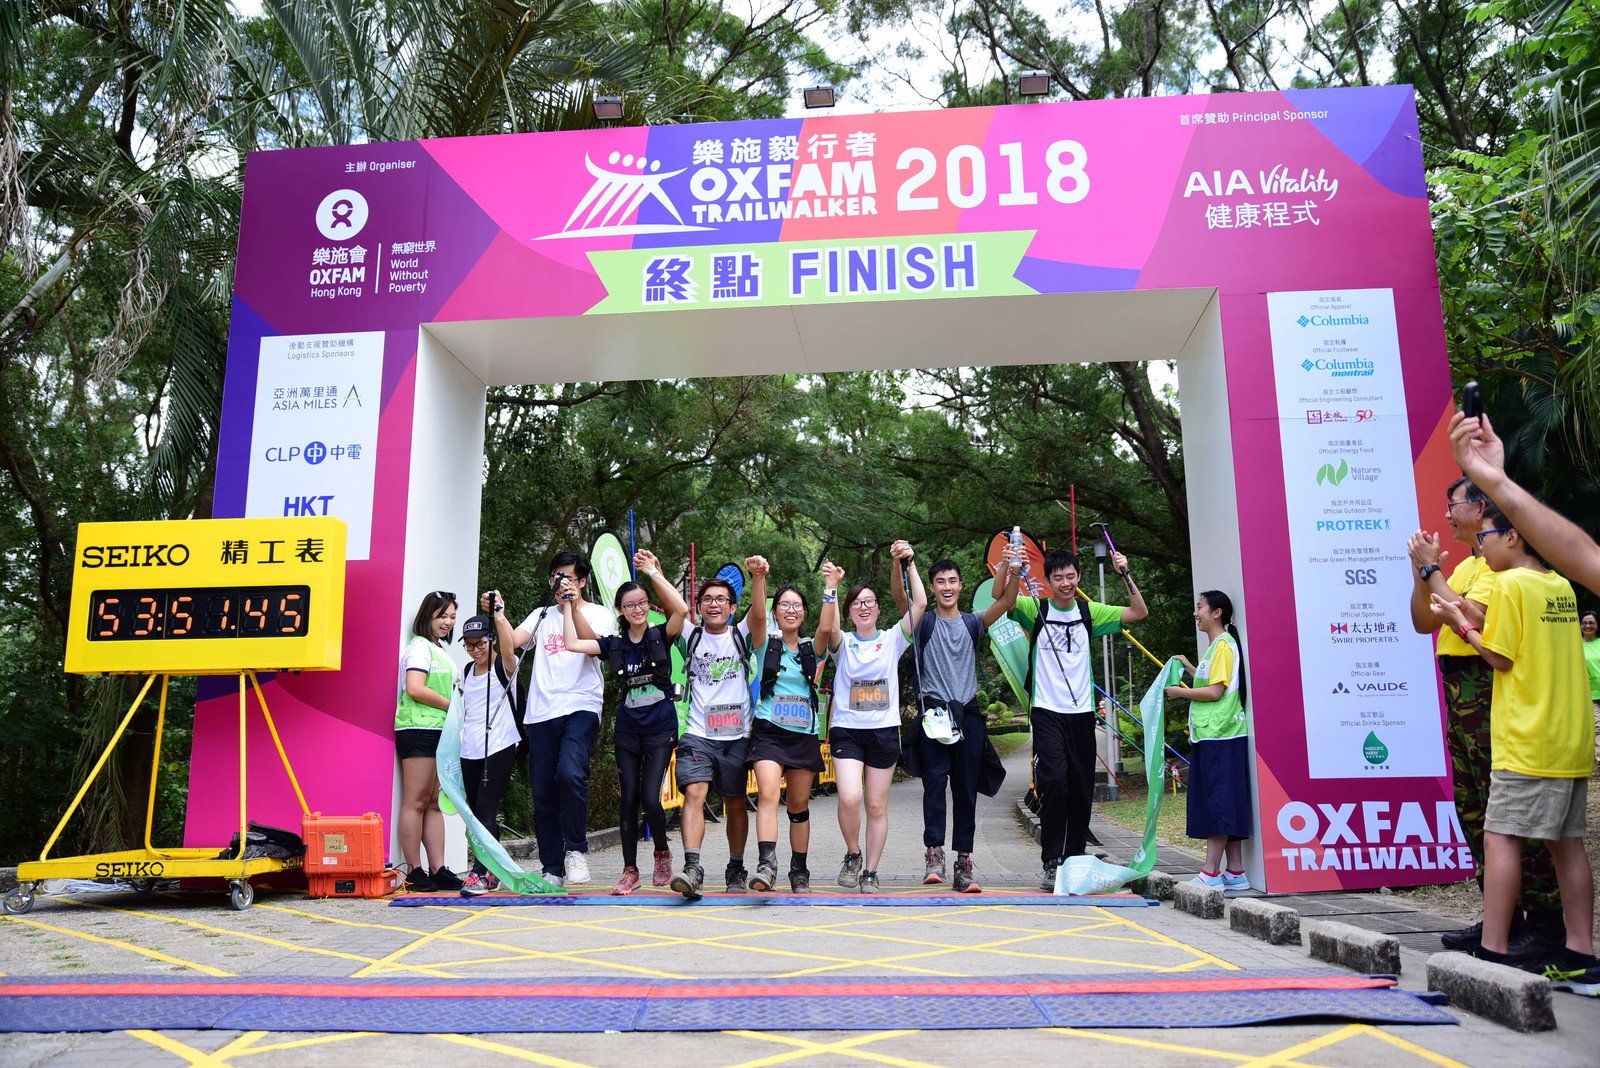 Stephen Fisher, Acting Director General of Oxfam Hong Kong, greeting the last team, which completed the 100 km trail in 47 hours 51 minutes, at the Finish Point. 